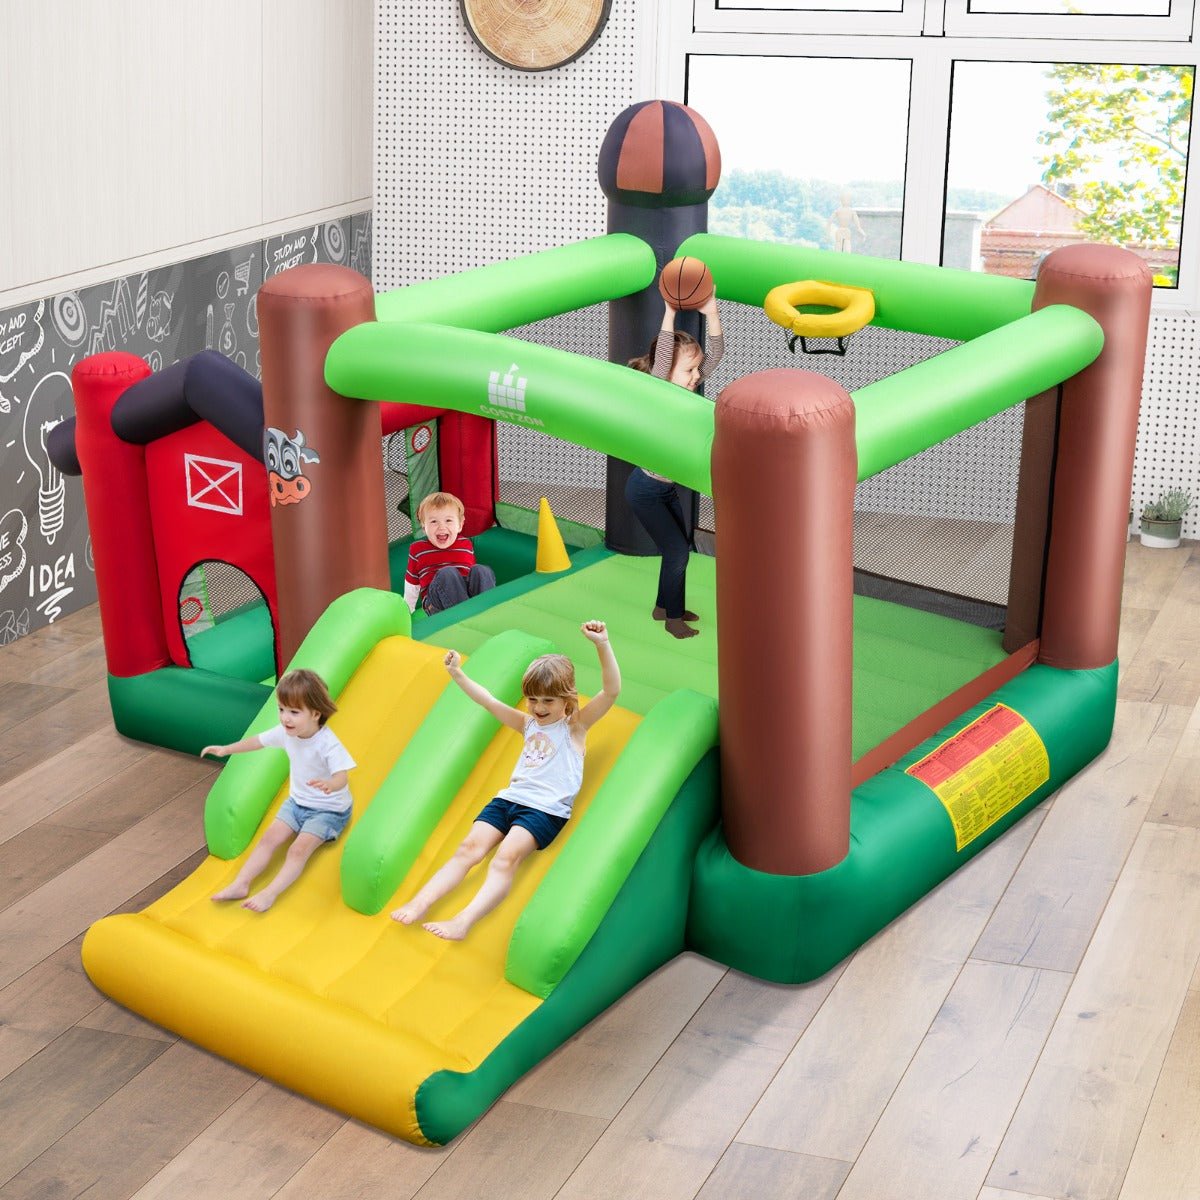 Inflatable Play Center - Dual Slides for Outdoor Fun and Adventure